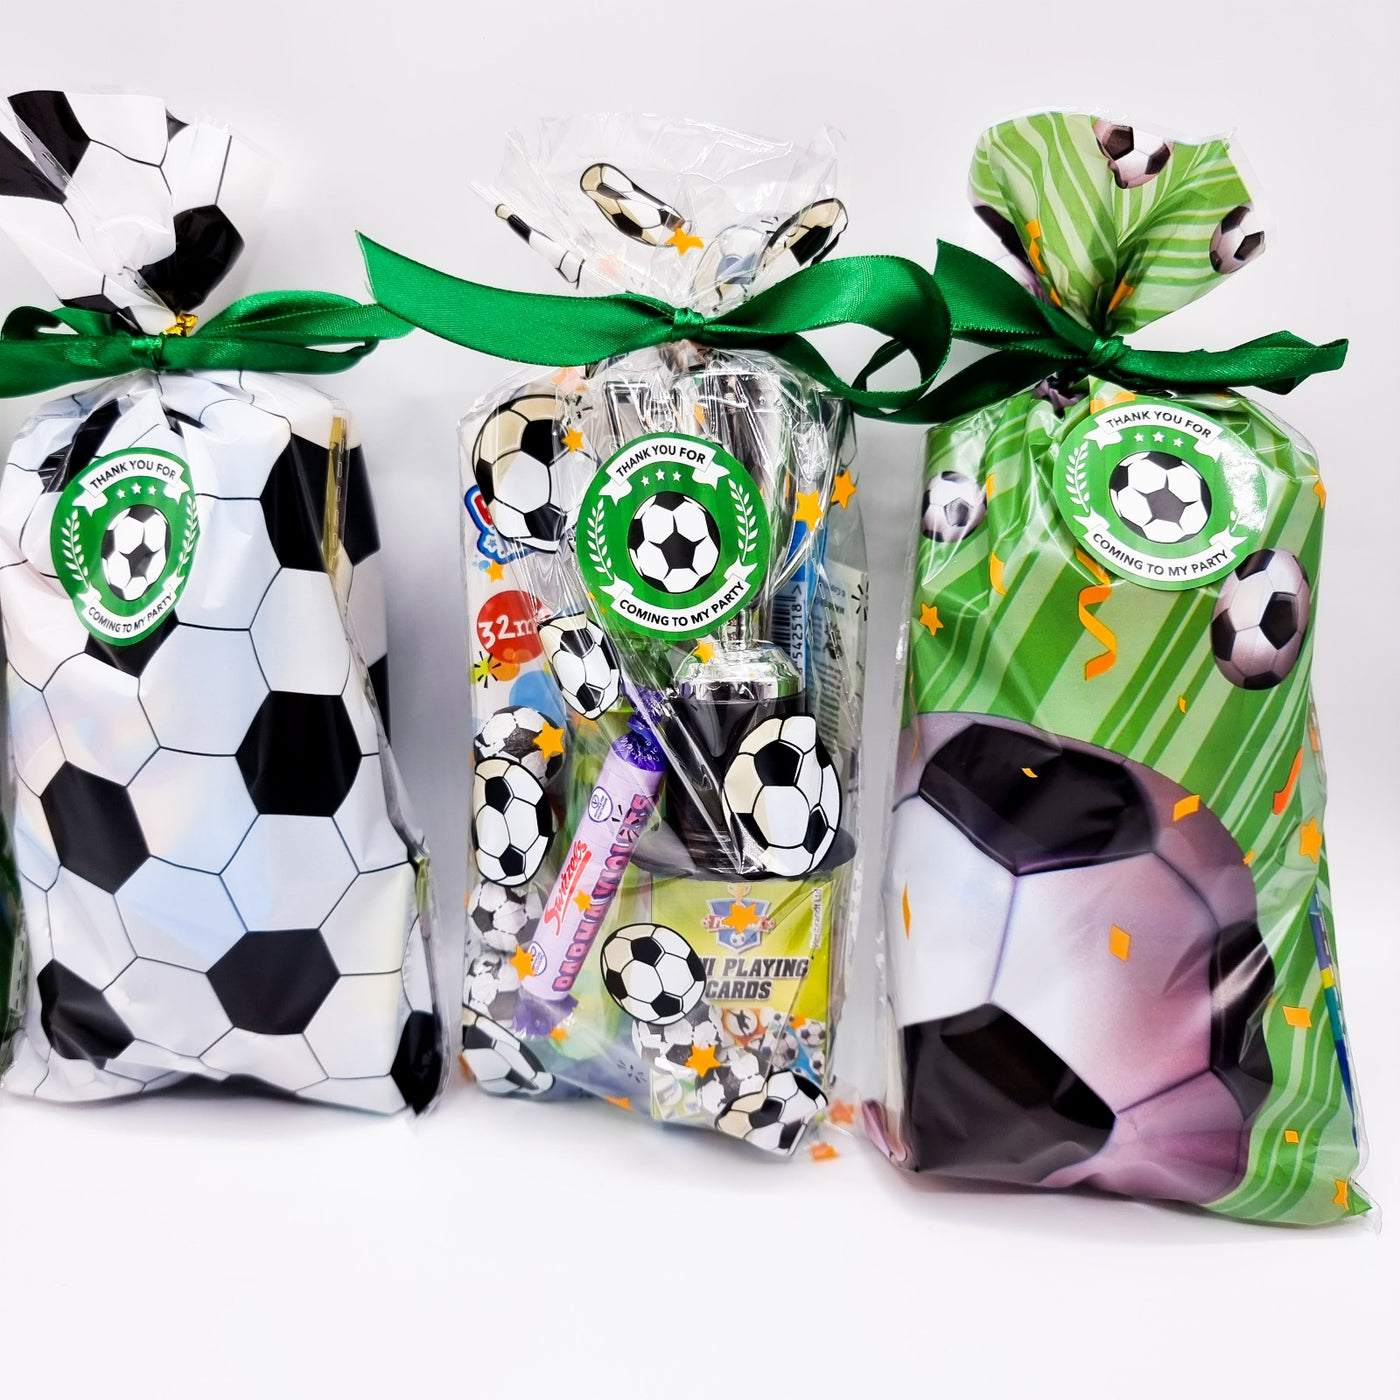 Children's Pre-filled Football Party Bags With Lanyard Candy Dummy And Toys.